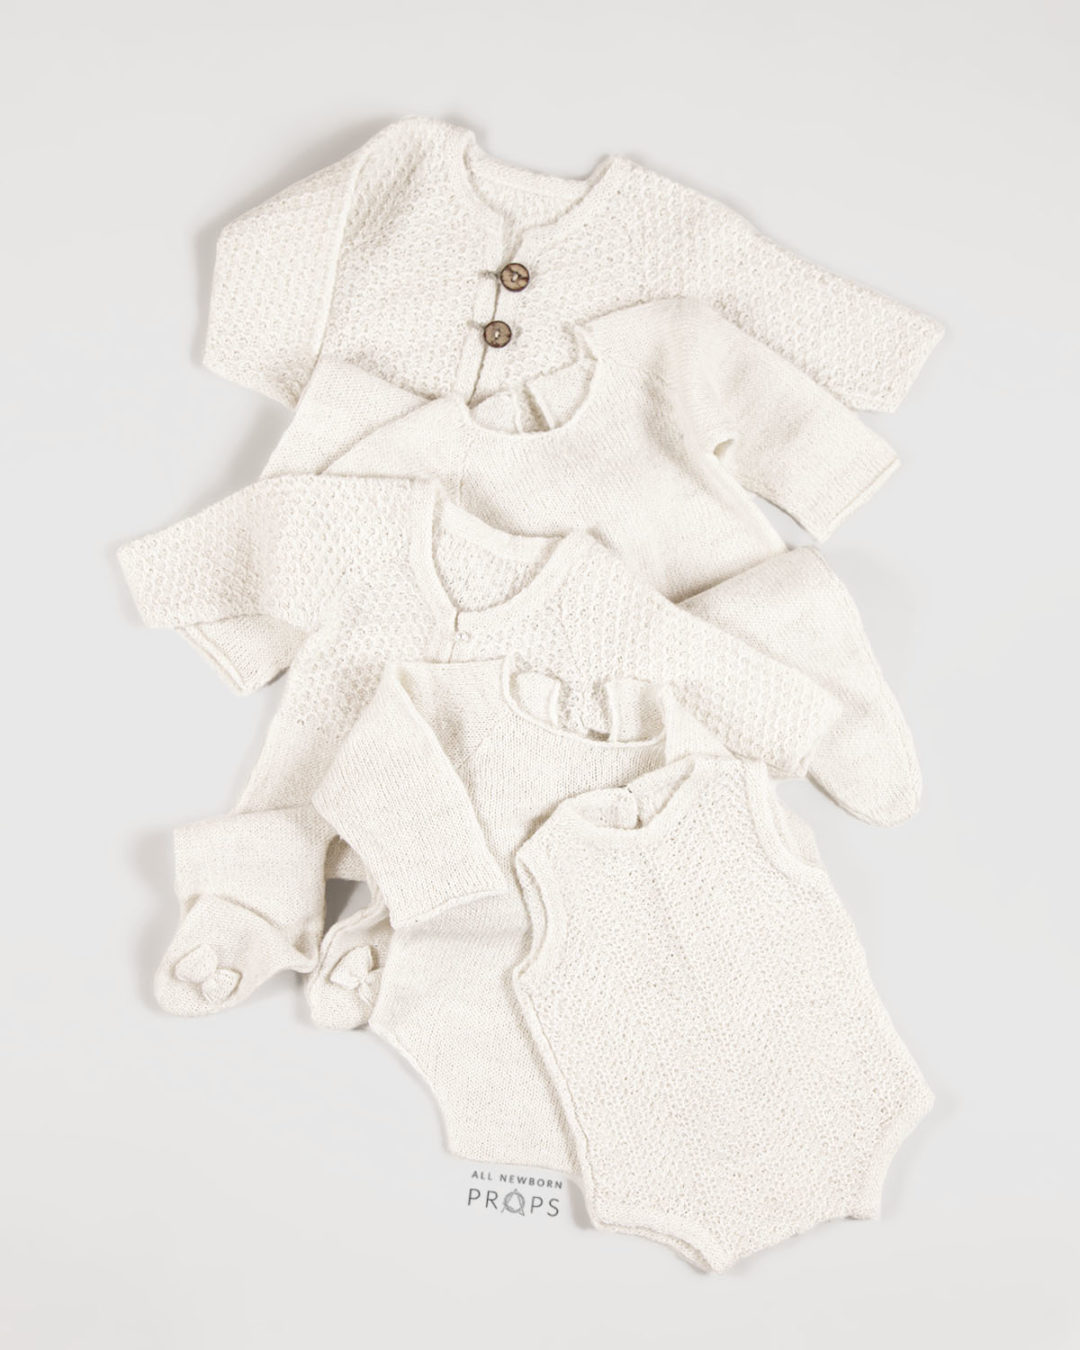 props-for-newborn-photography-knitted-outfits-boy-girl-white-europe